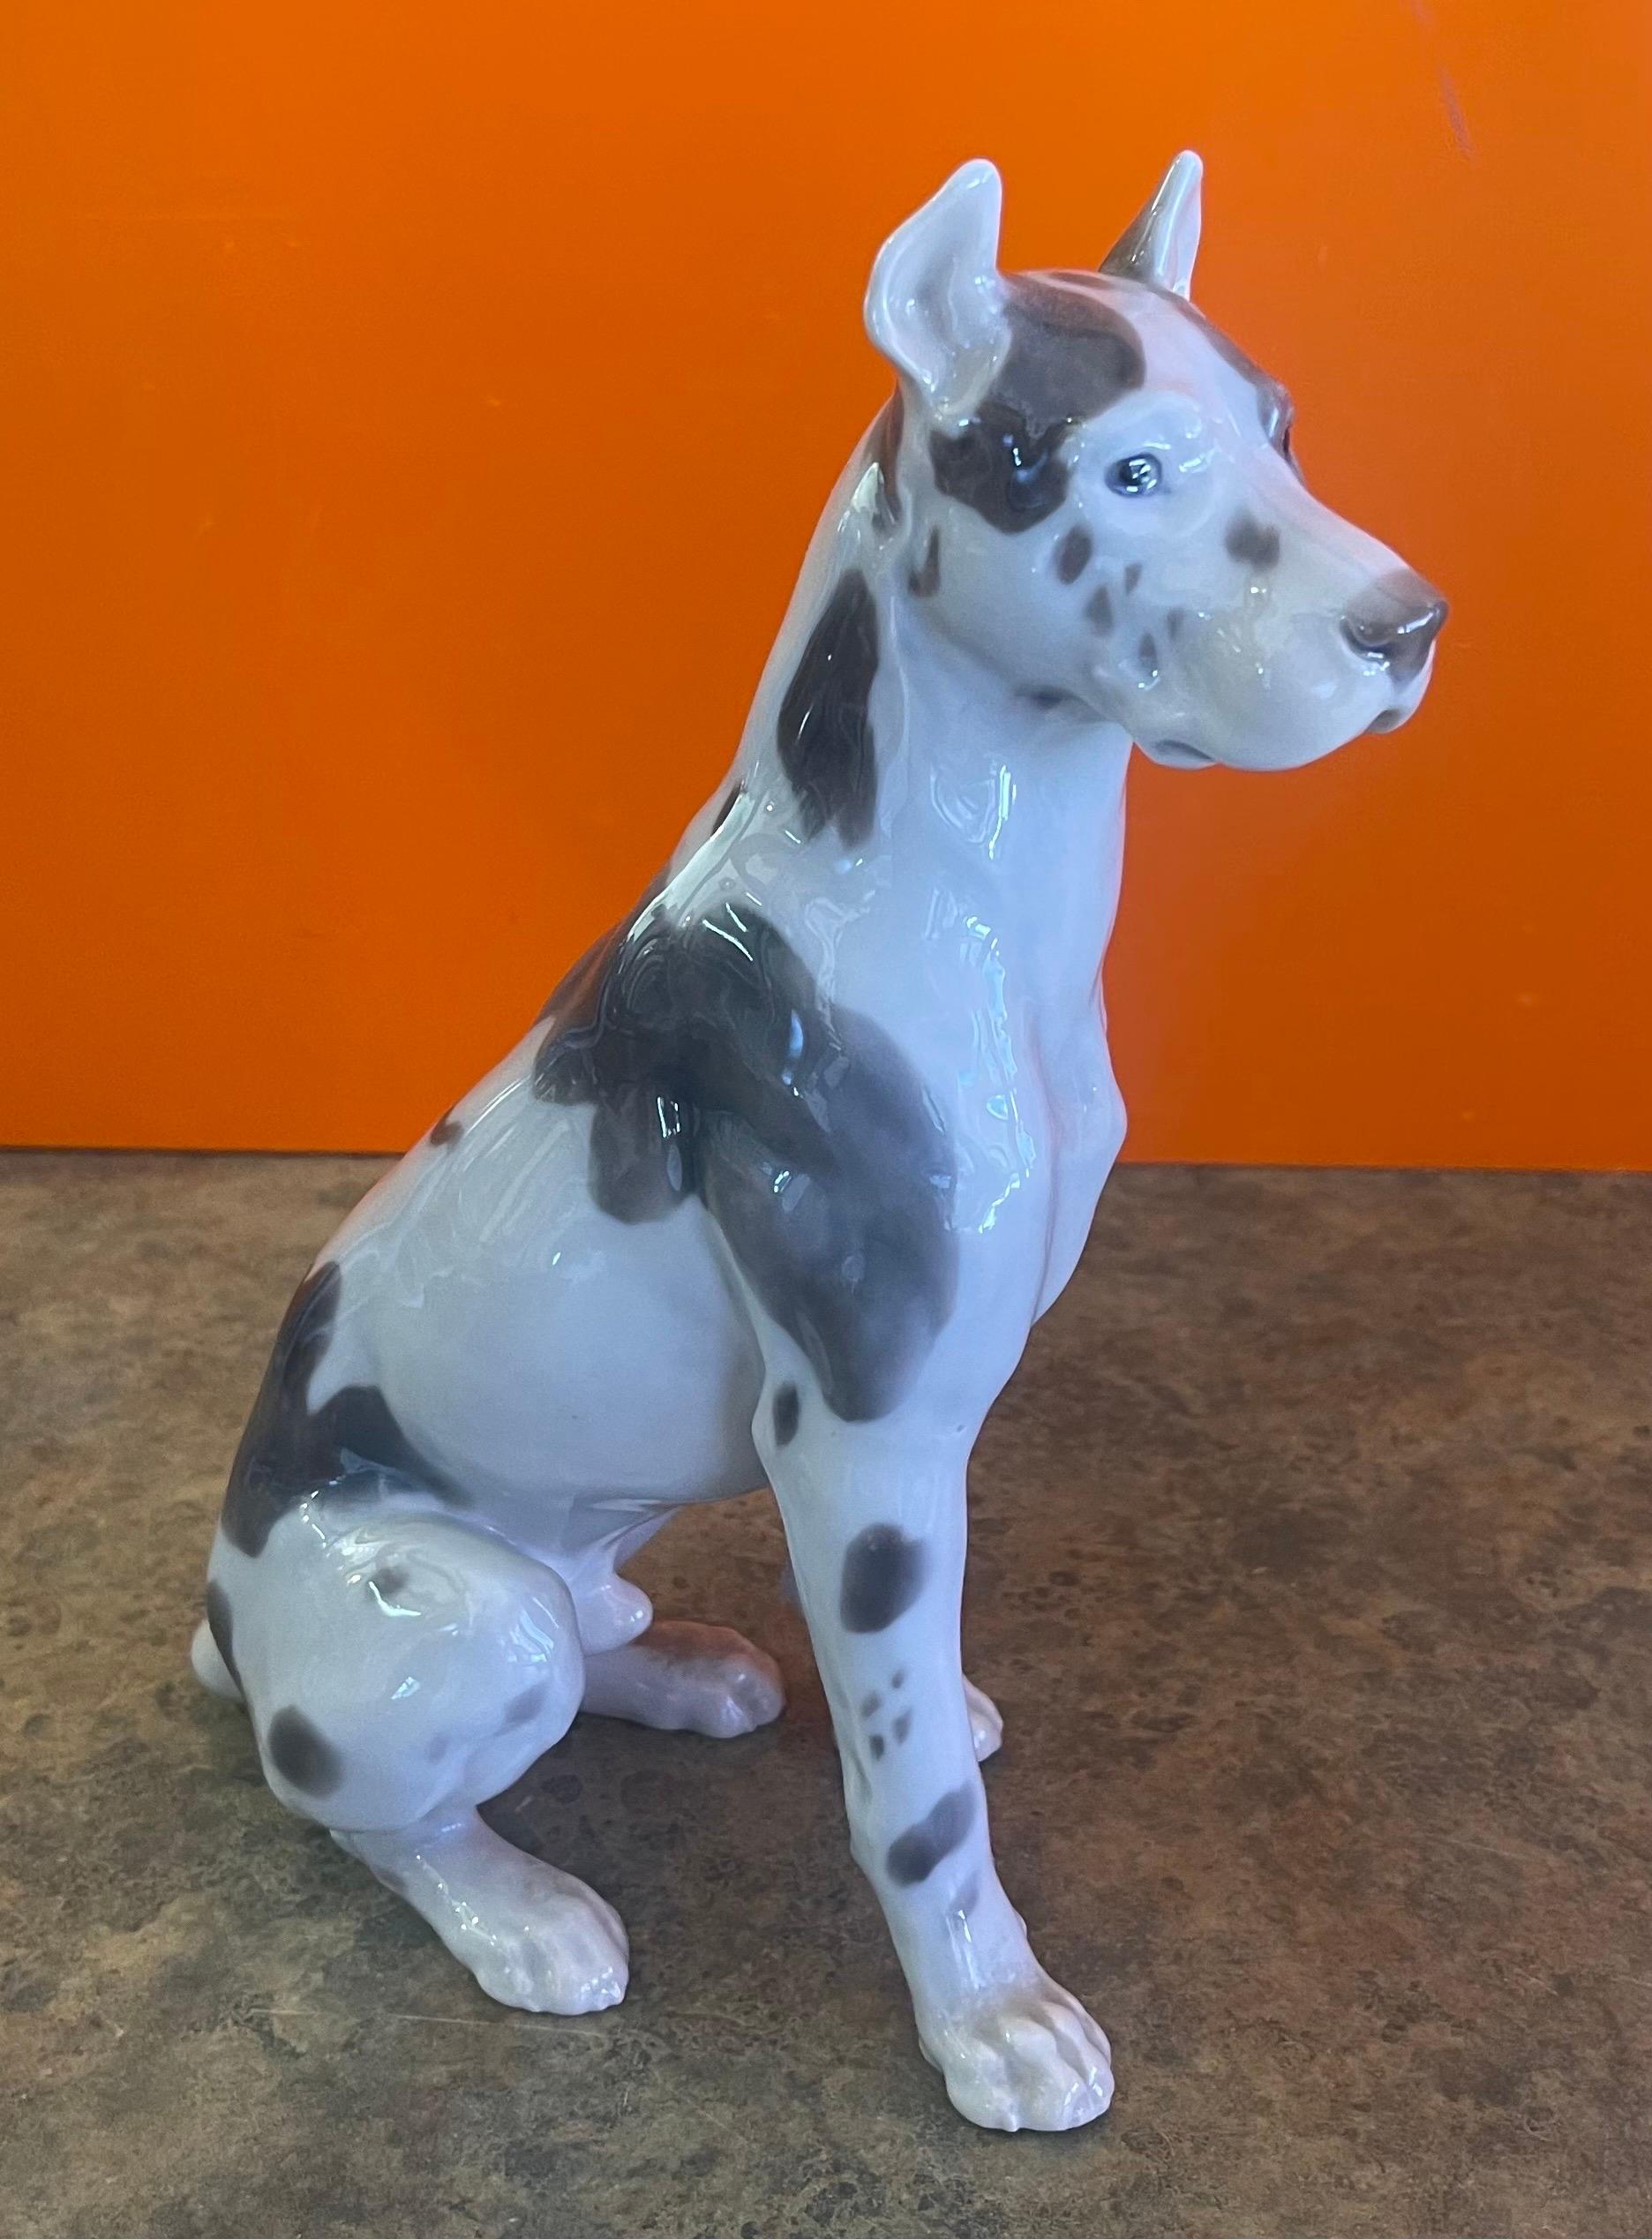 Mid-Century Modern Large Hand-Painted Porcelain Great Dane Sculpture by Bing & Grondahl For Sale